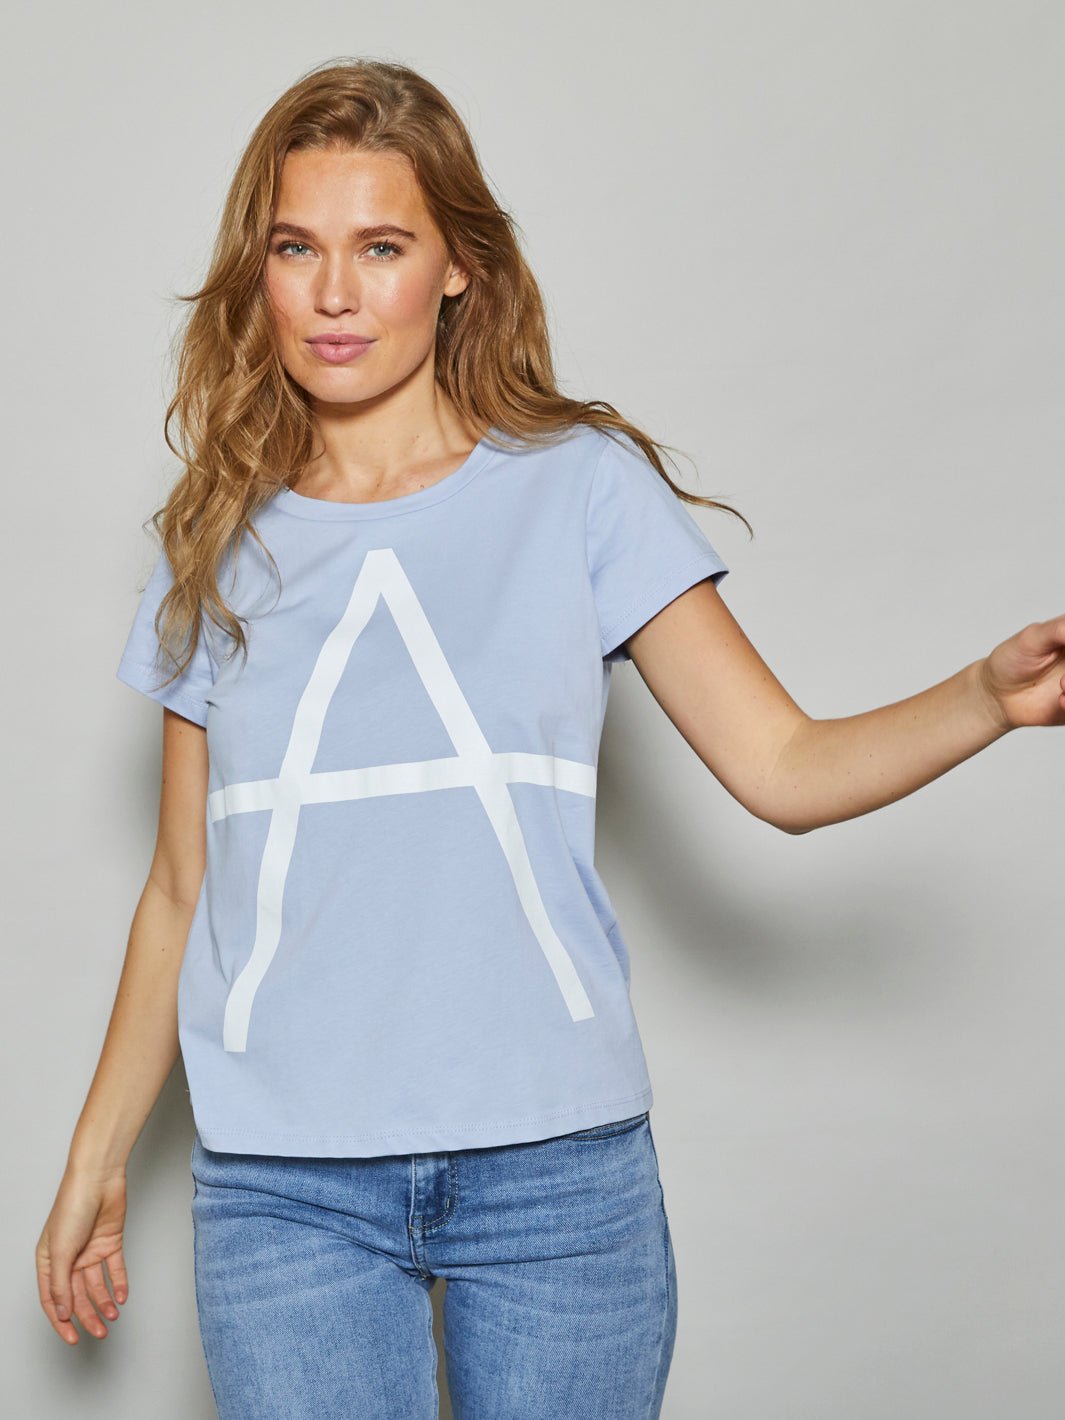 All Week Gabie tee s/s light blue with white A - Online-Mode